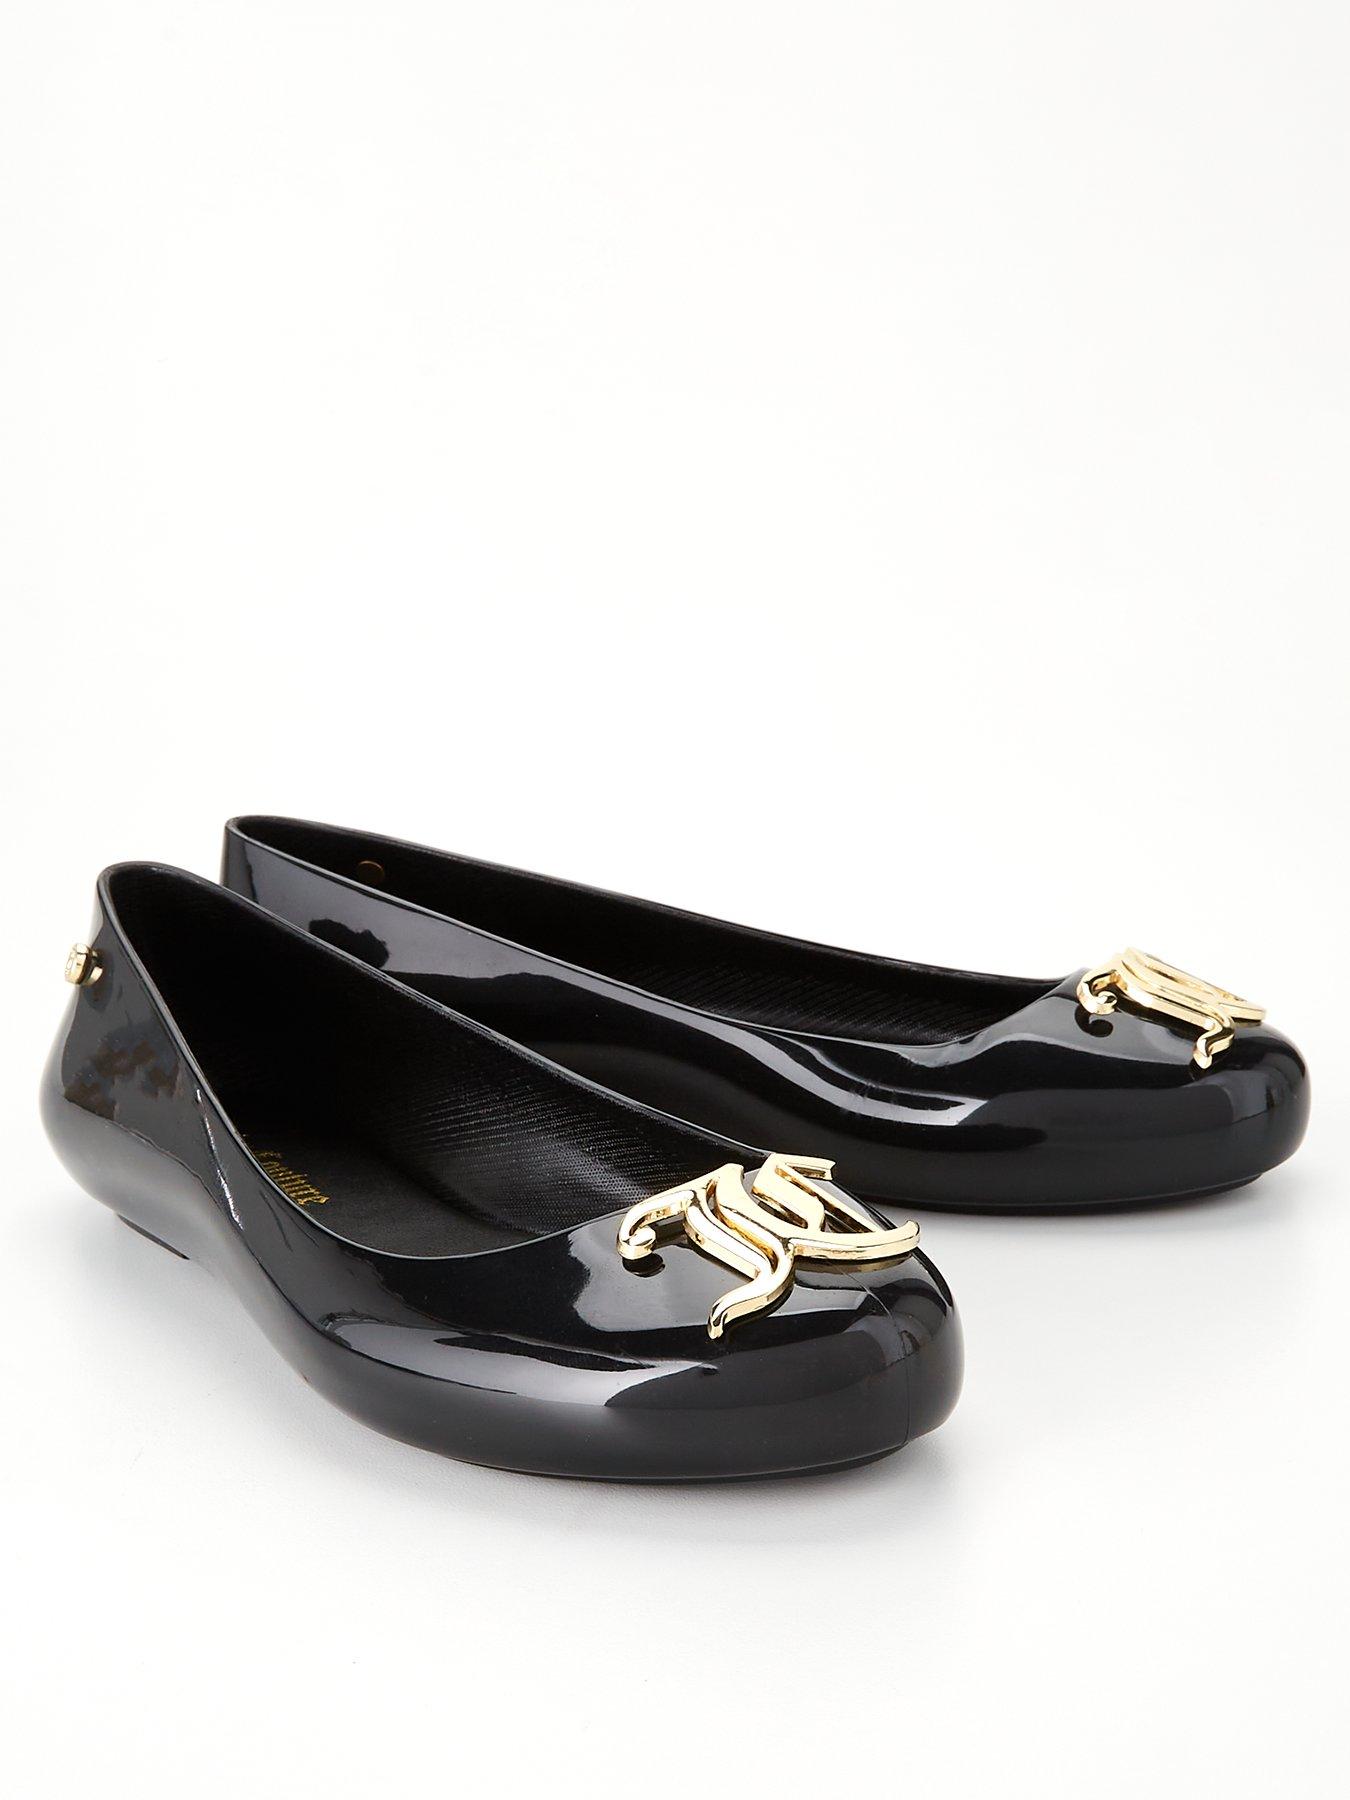 Juicy Couture Silicone Ballerina Pump - Black/Gold | very.co.uk